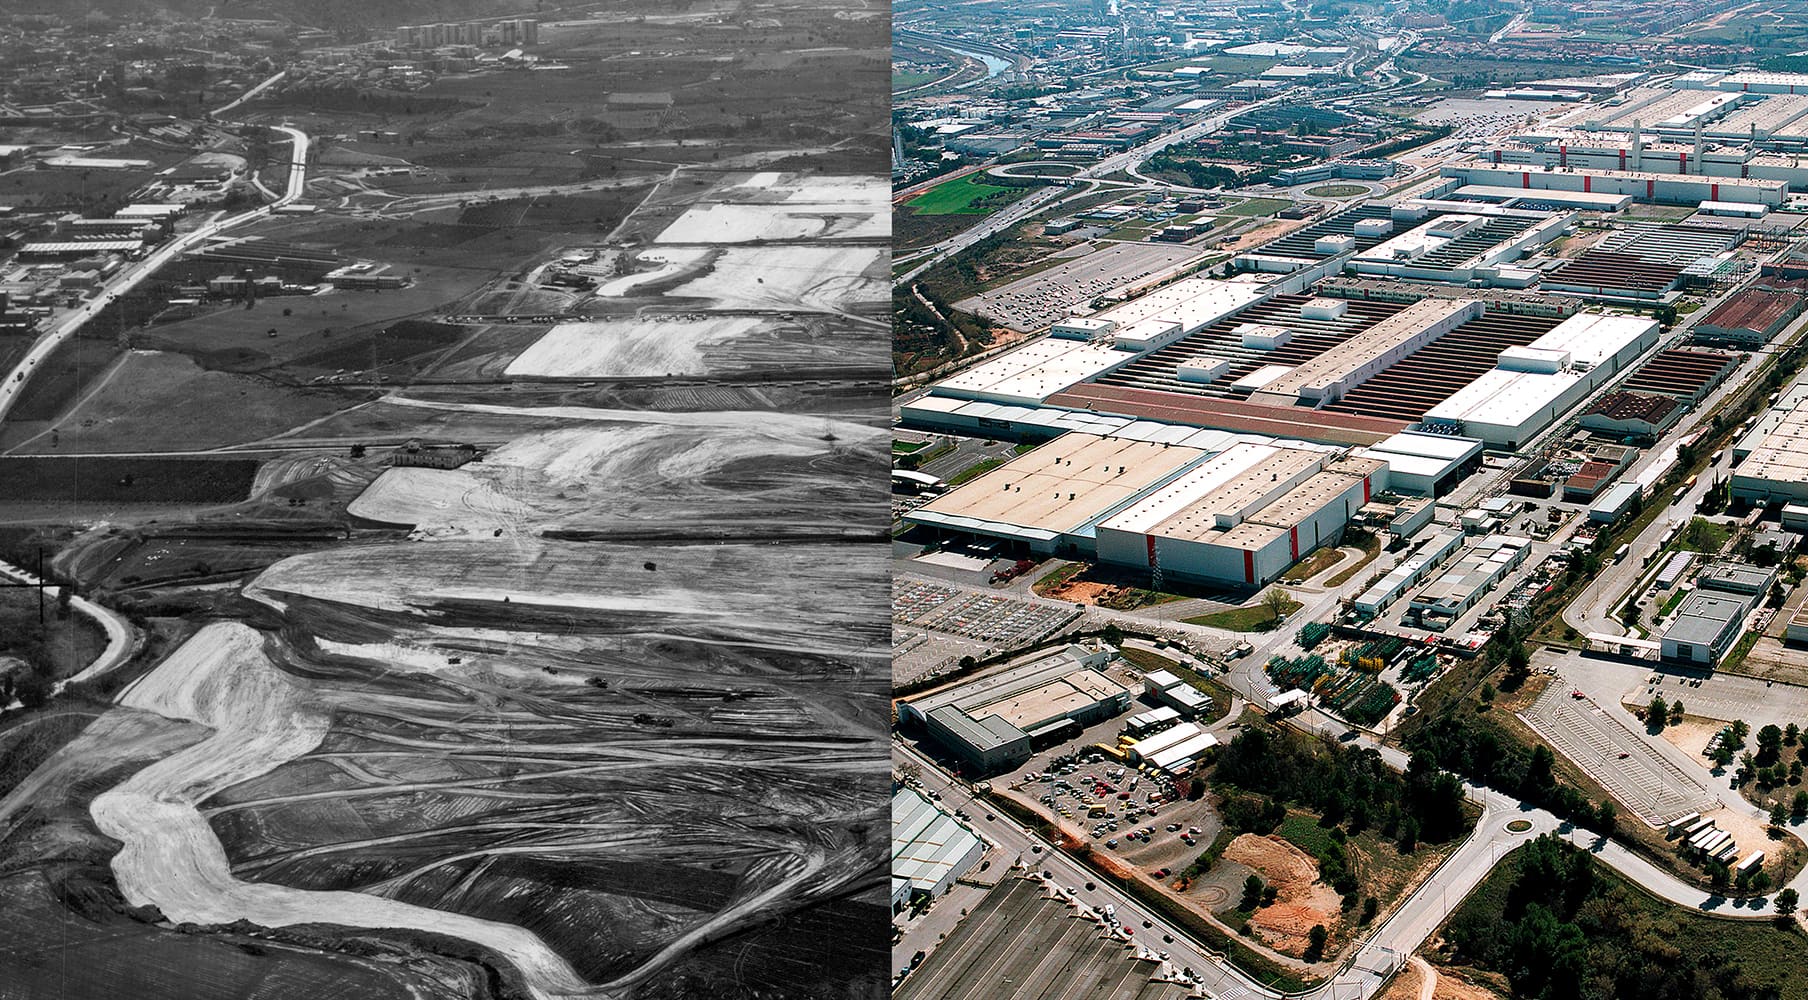 The SEAT Martorell factory, inaugurated in 1993, turns 25 this year.